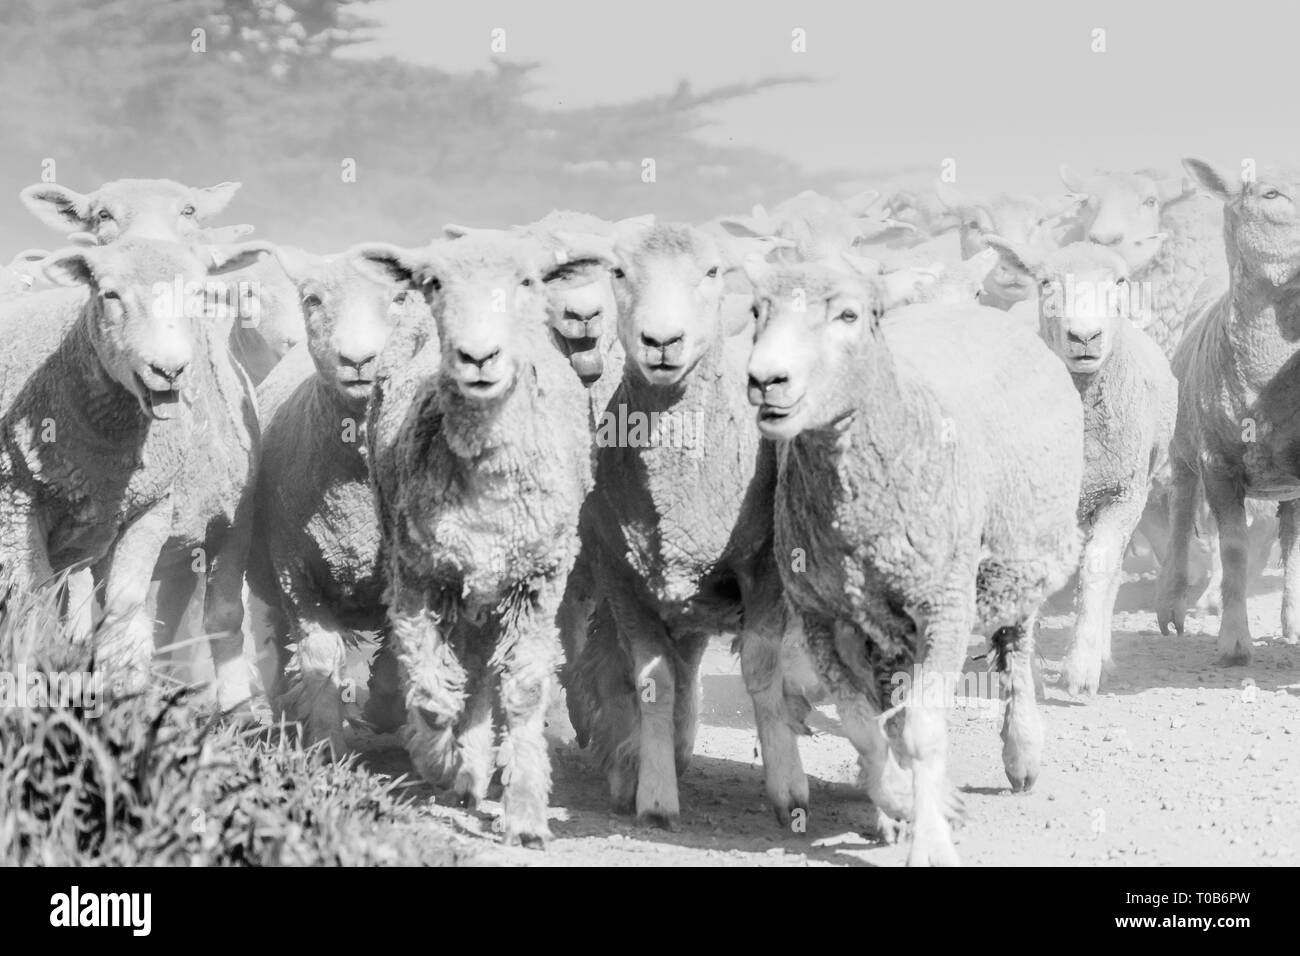 Black and white image through dust and haze kicked up by flock of sheep being moved along country road. Stock Photo